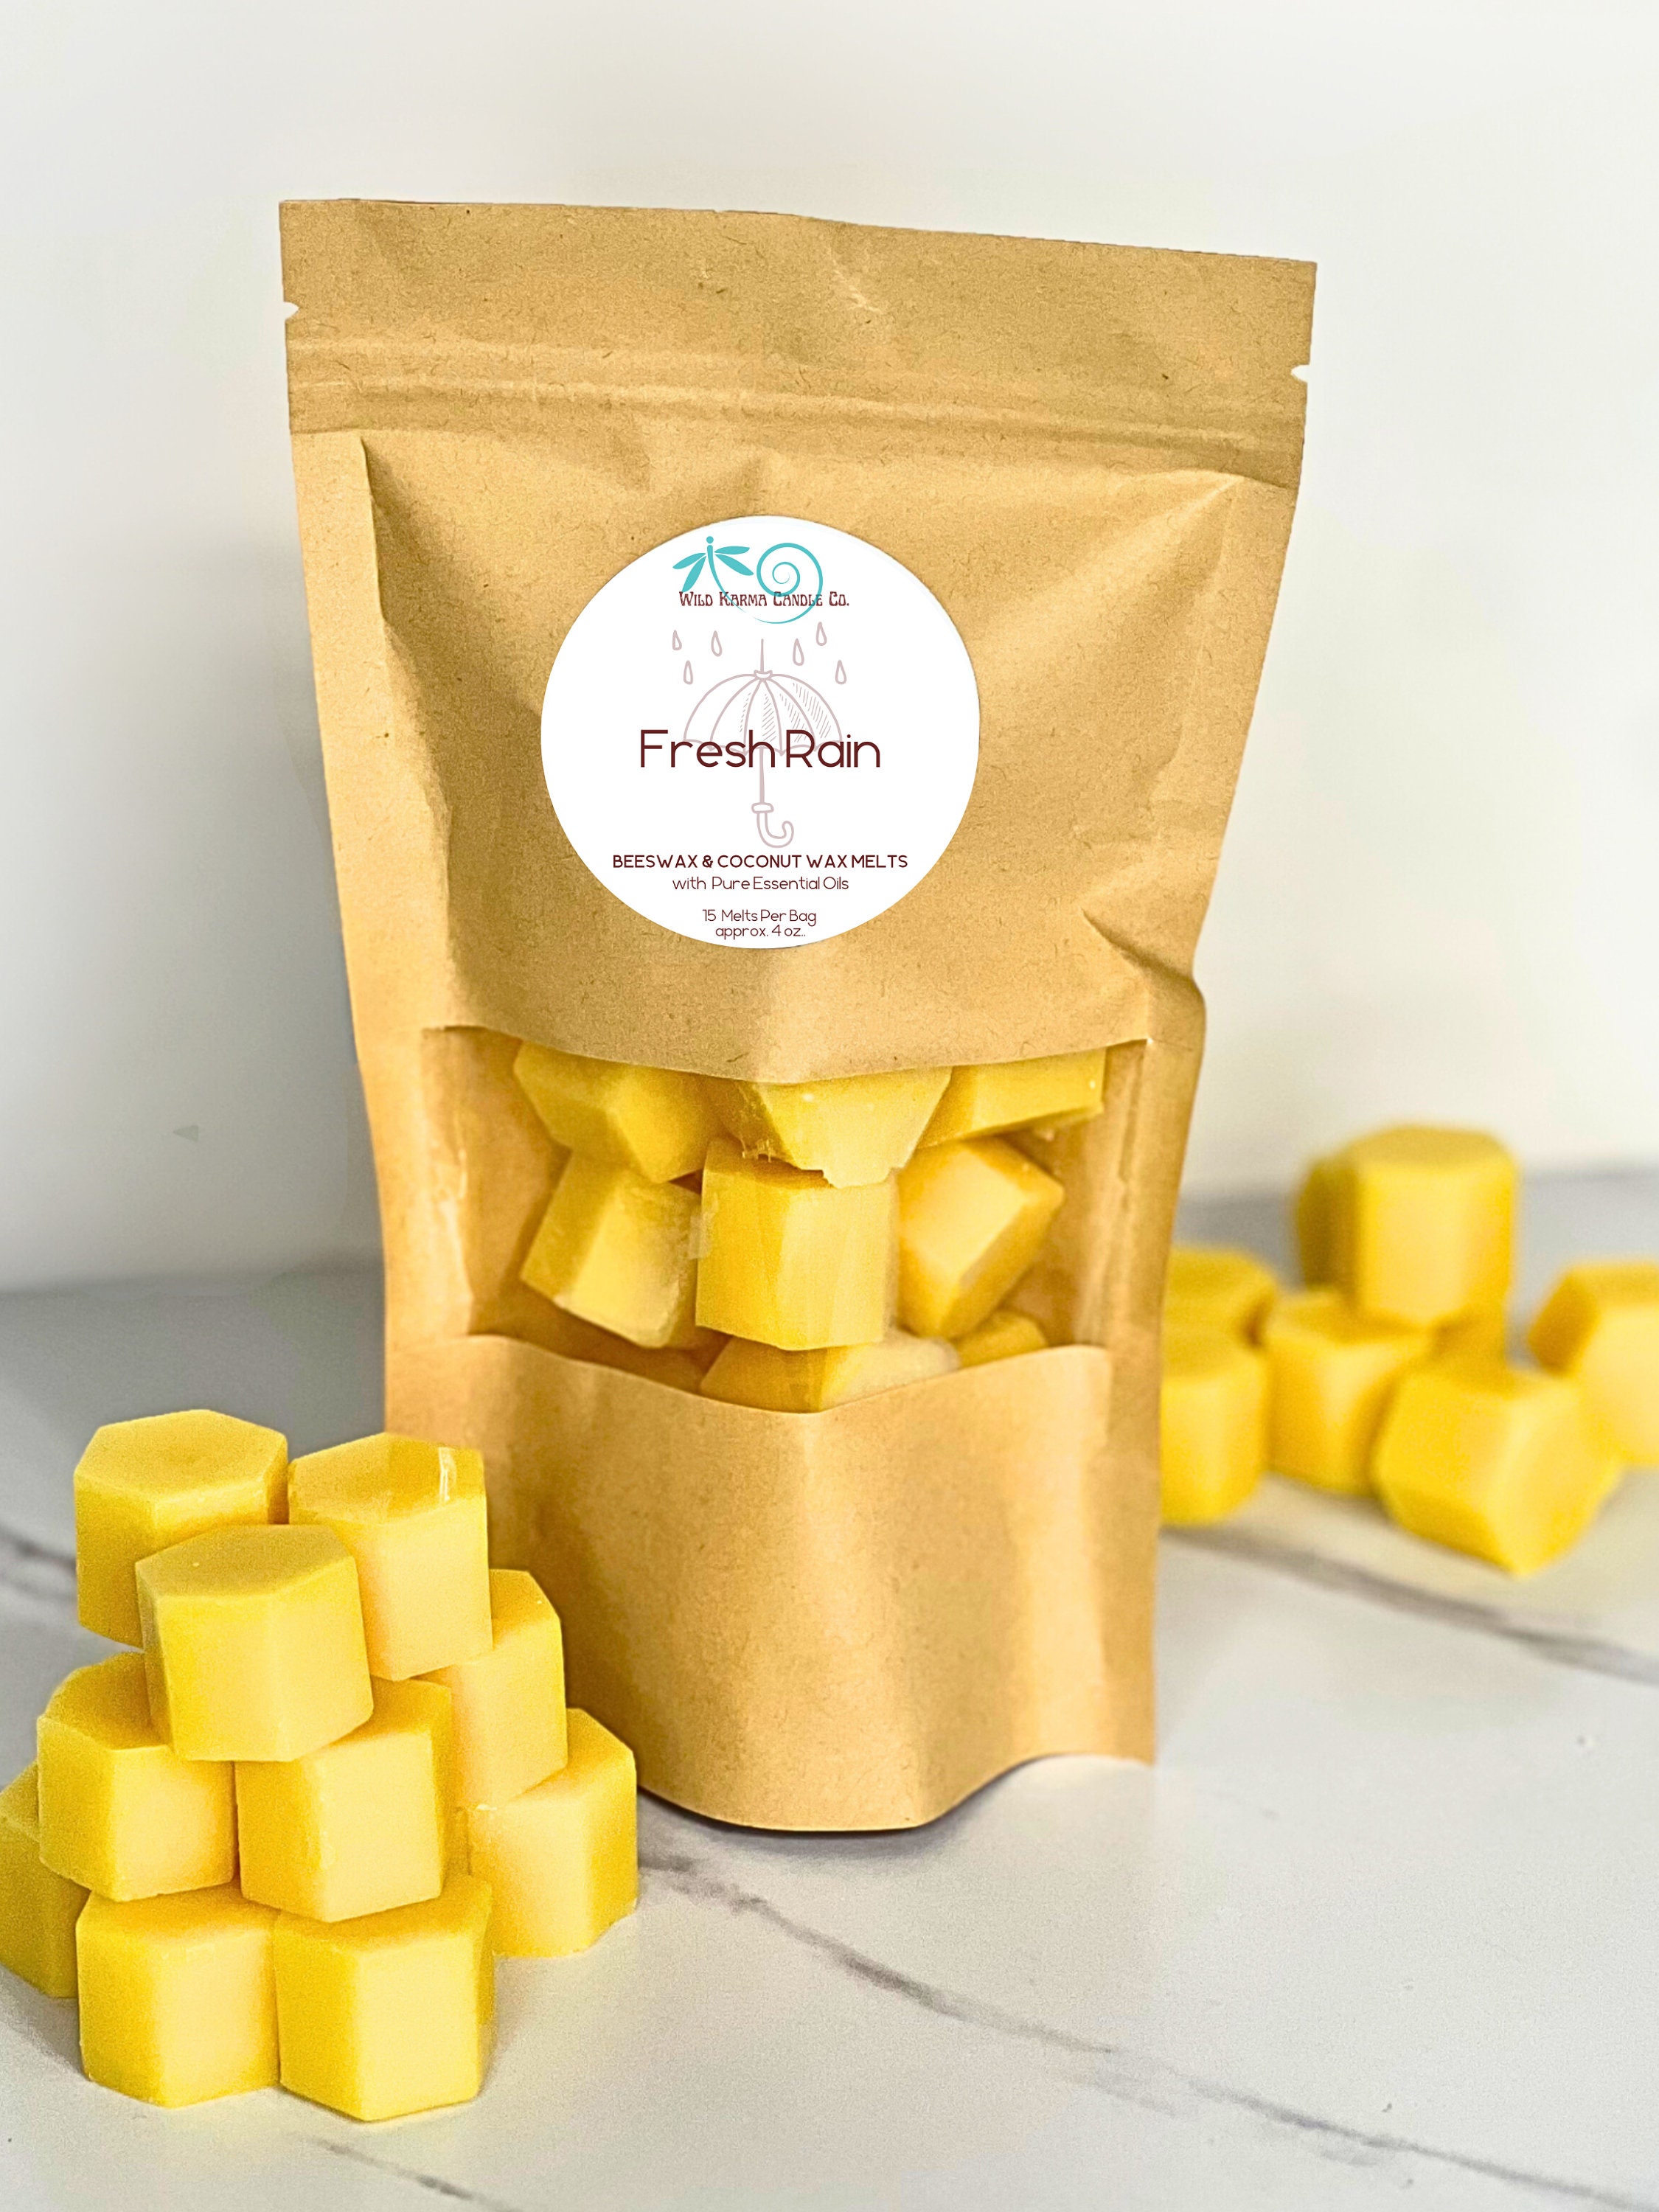 bejeweled / beeswax melts